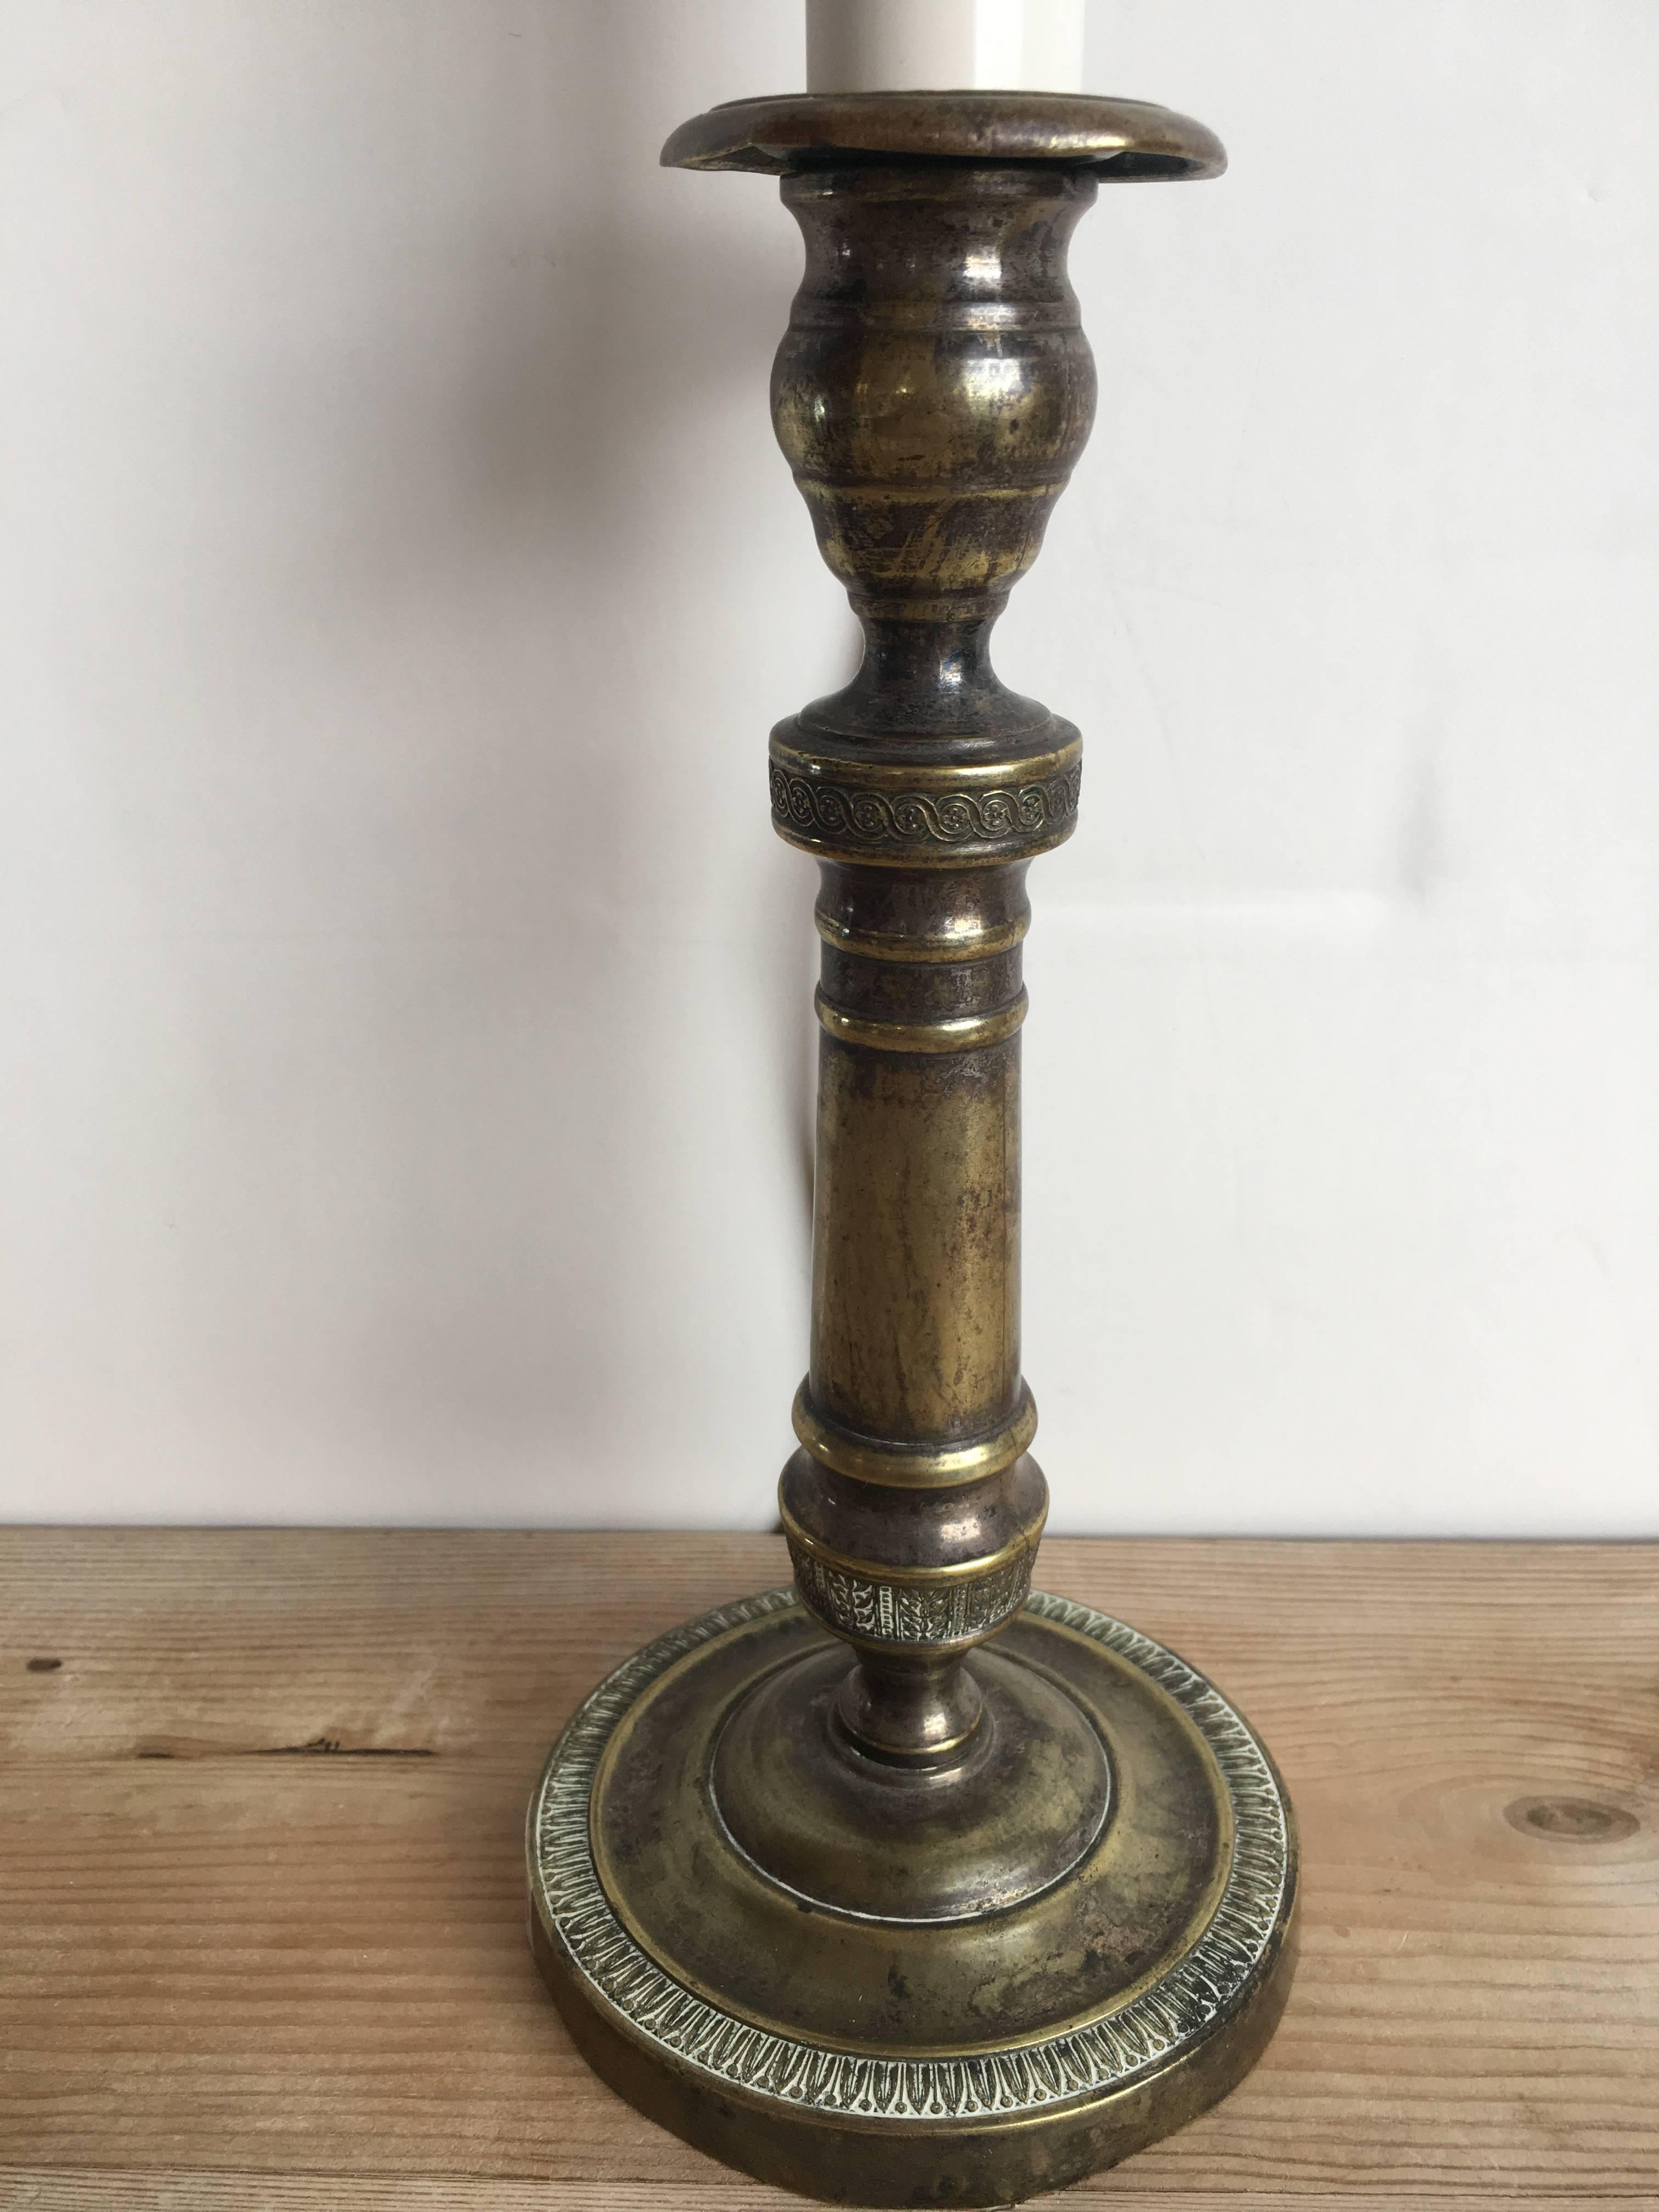 19th century engraved brass candlestick lamp. Newly USA wired.
   